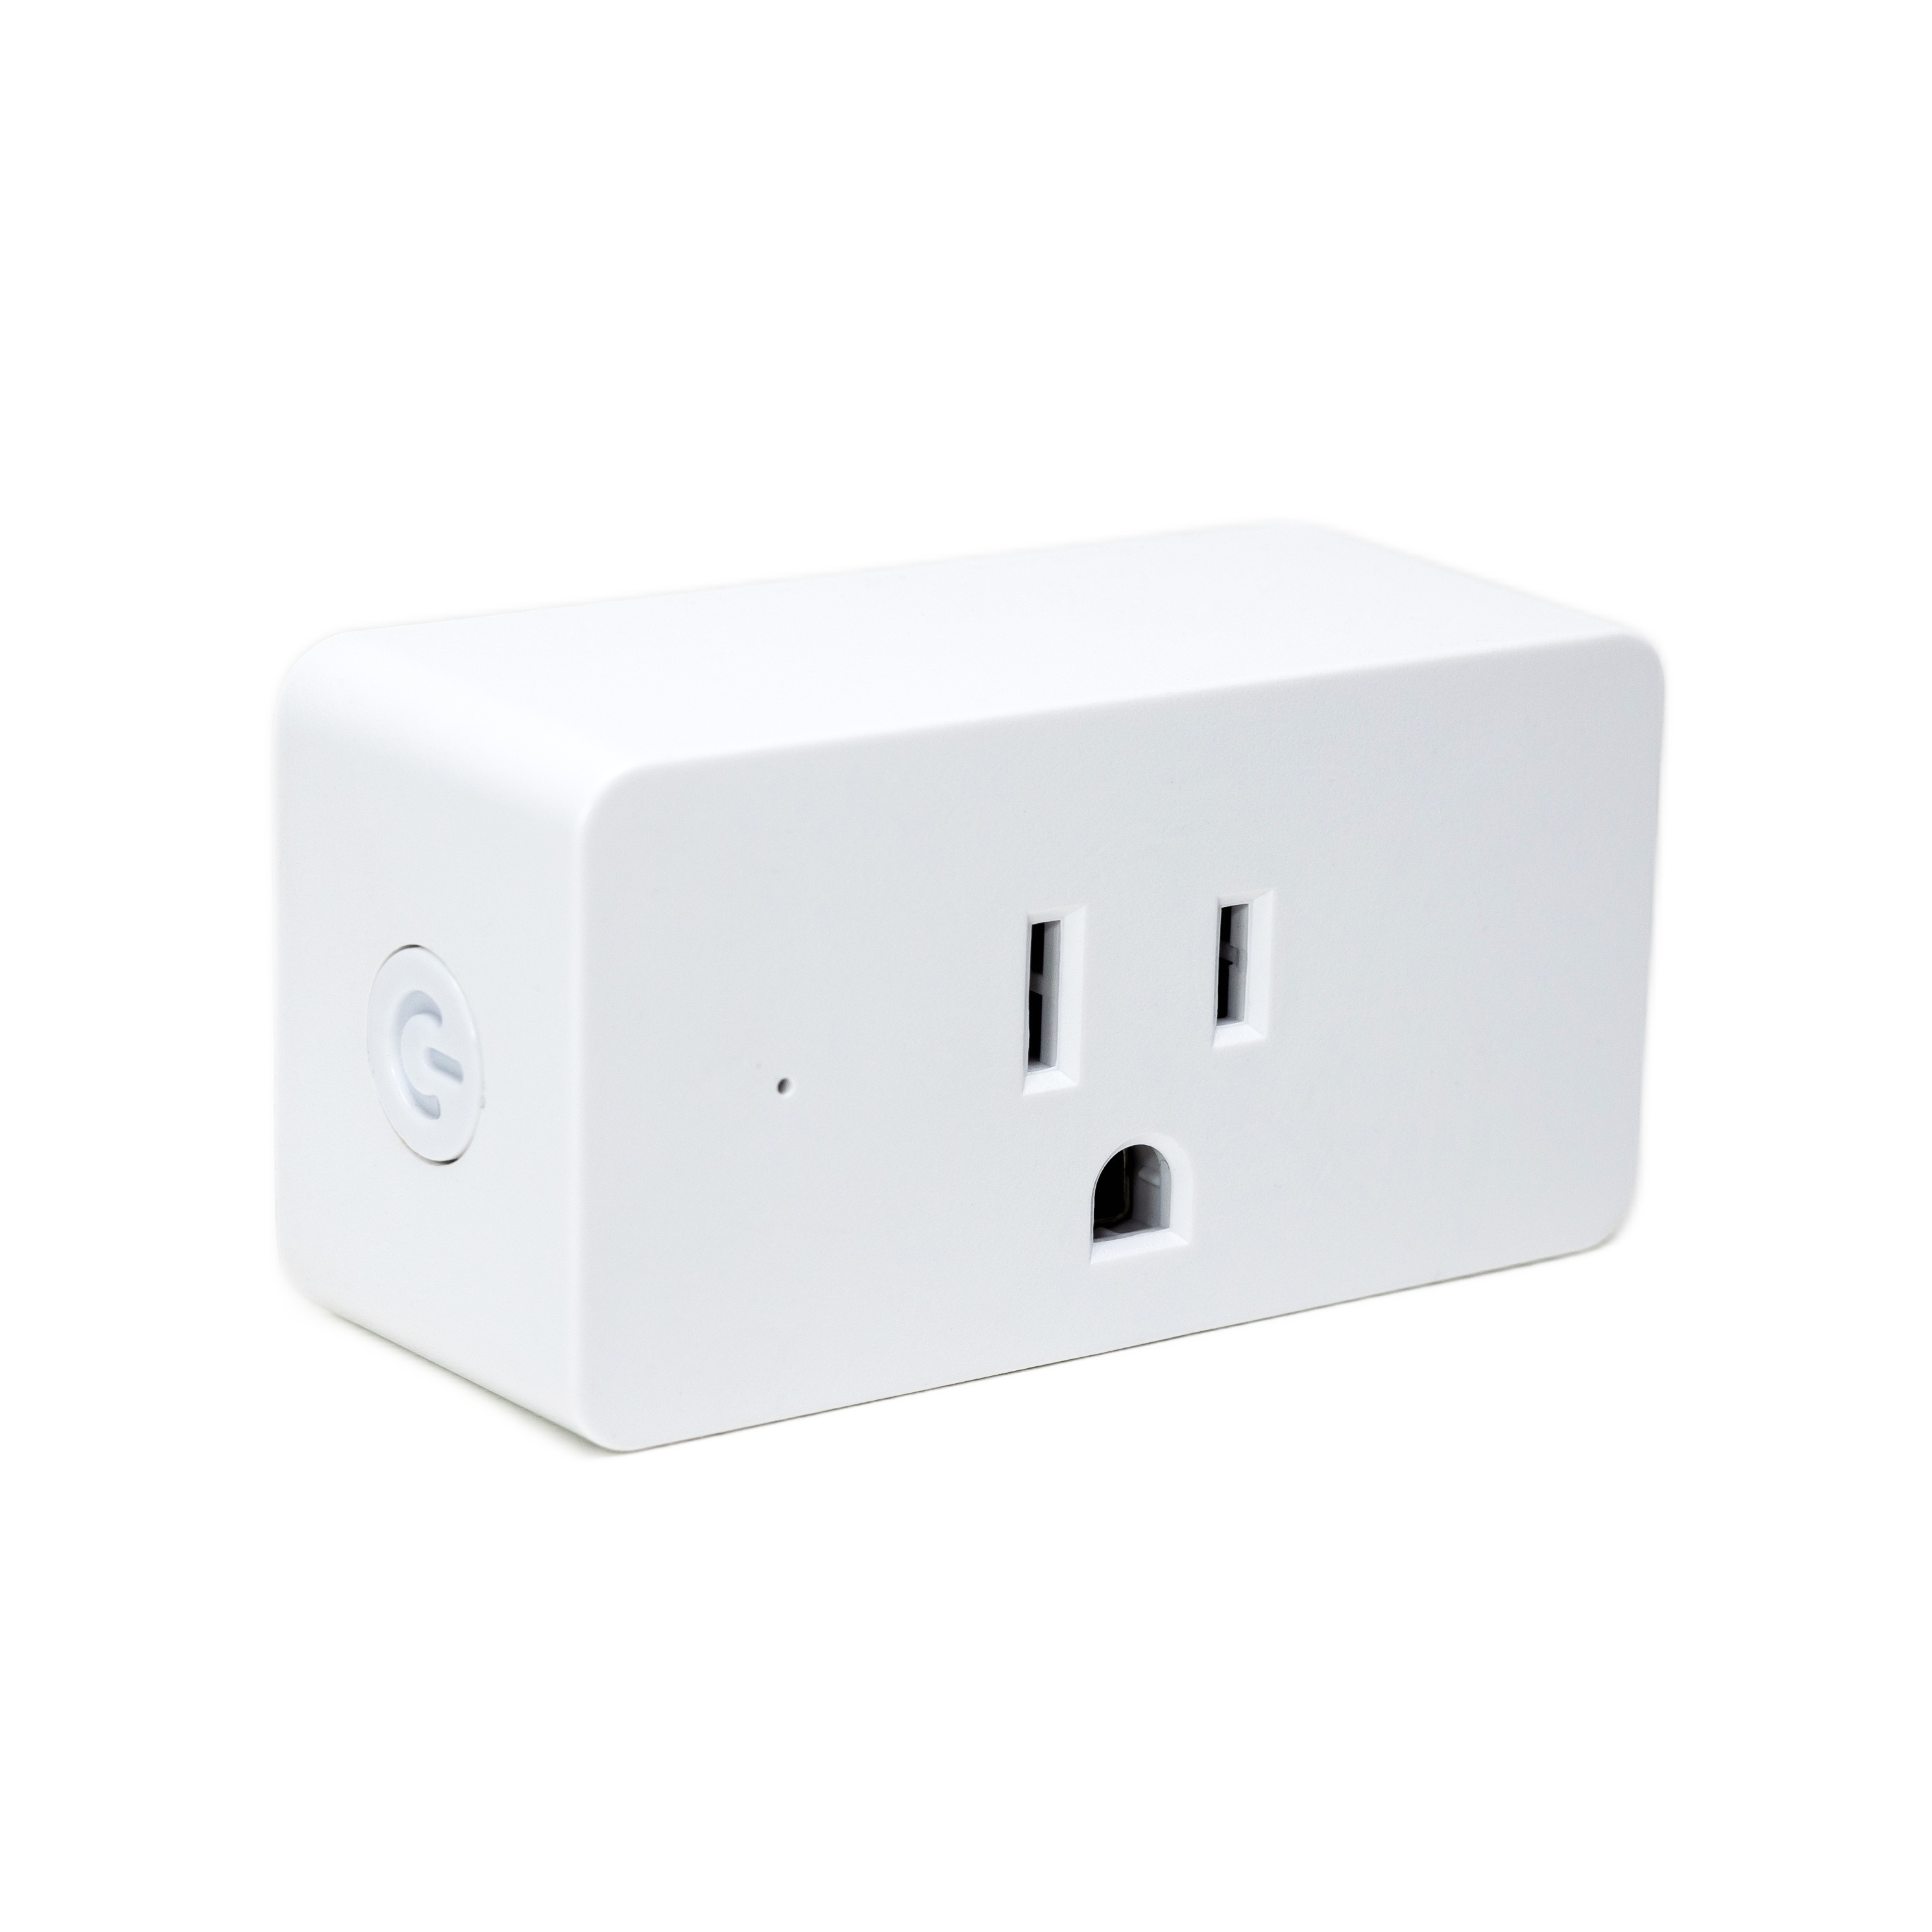 Smart Controlled WiFi Outlet Plug -  Alexa/Google Assistant